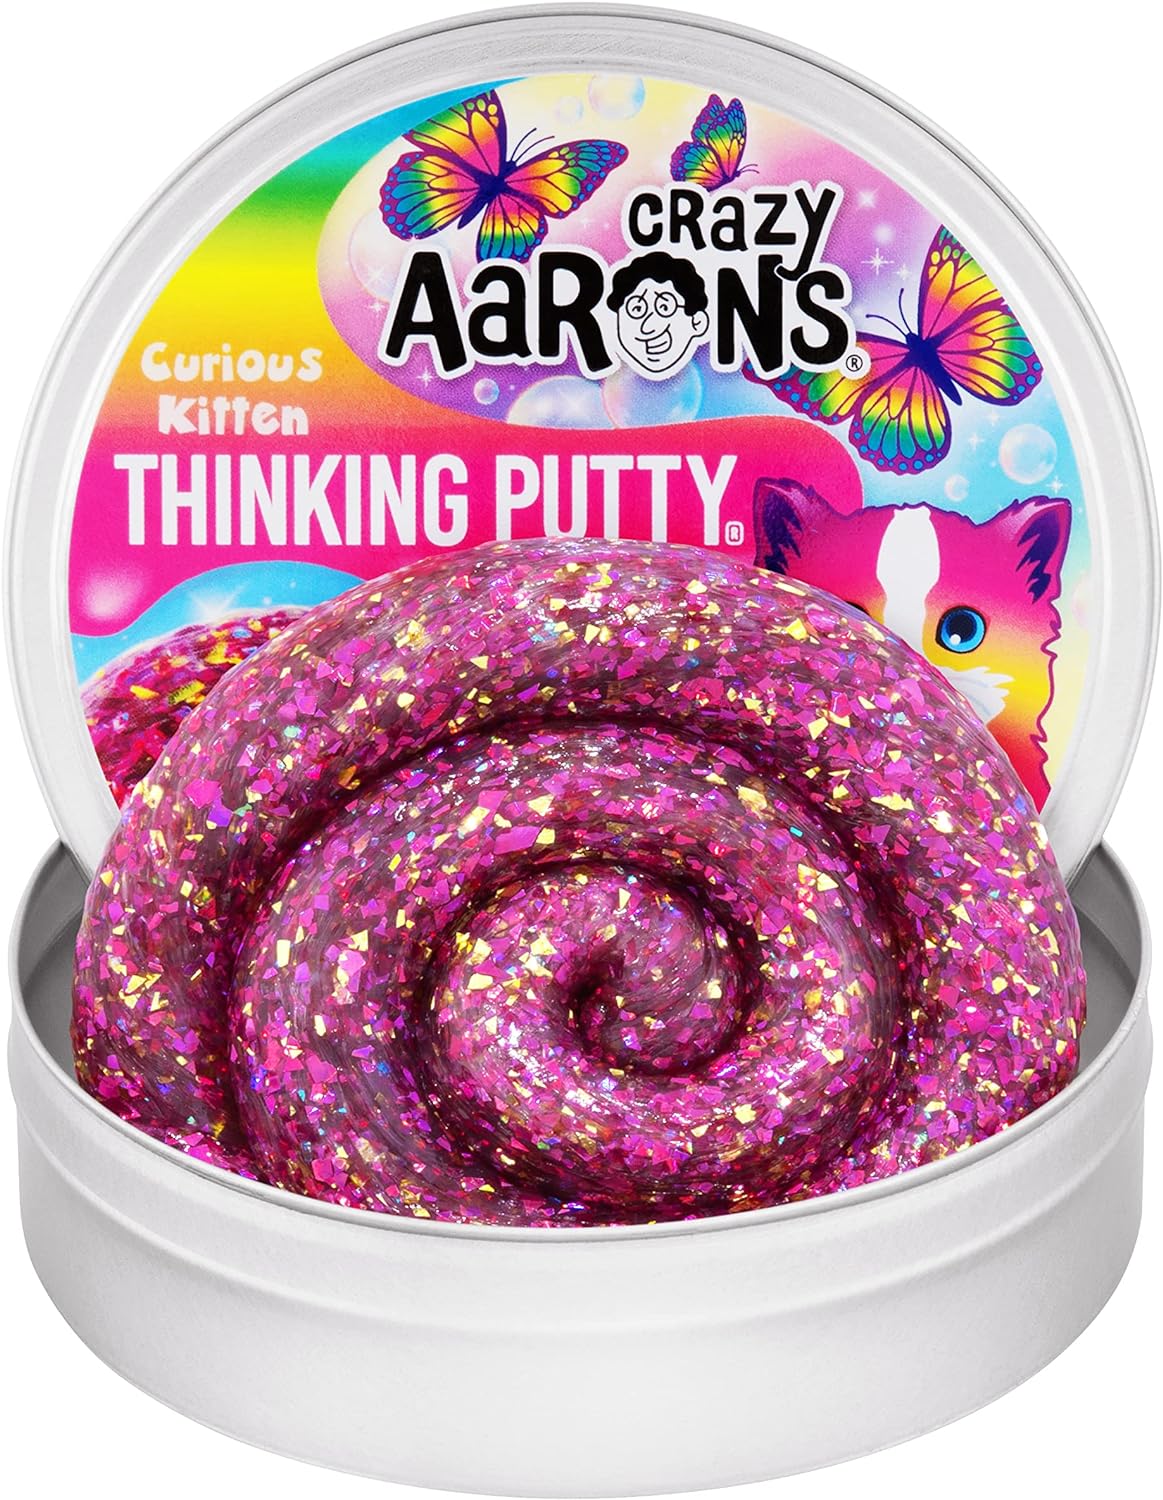 Crazy Aaron's Thinking Putty : Curious Kitty